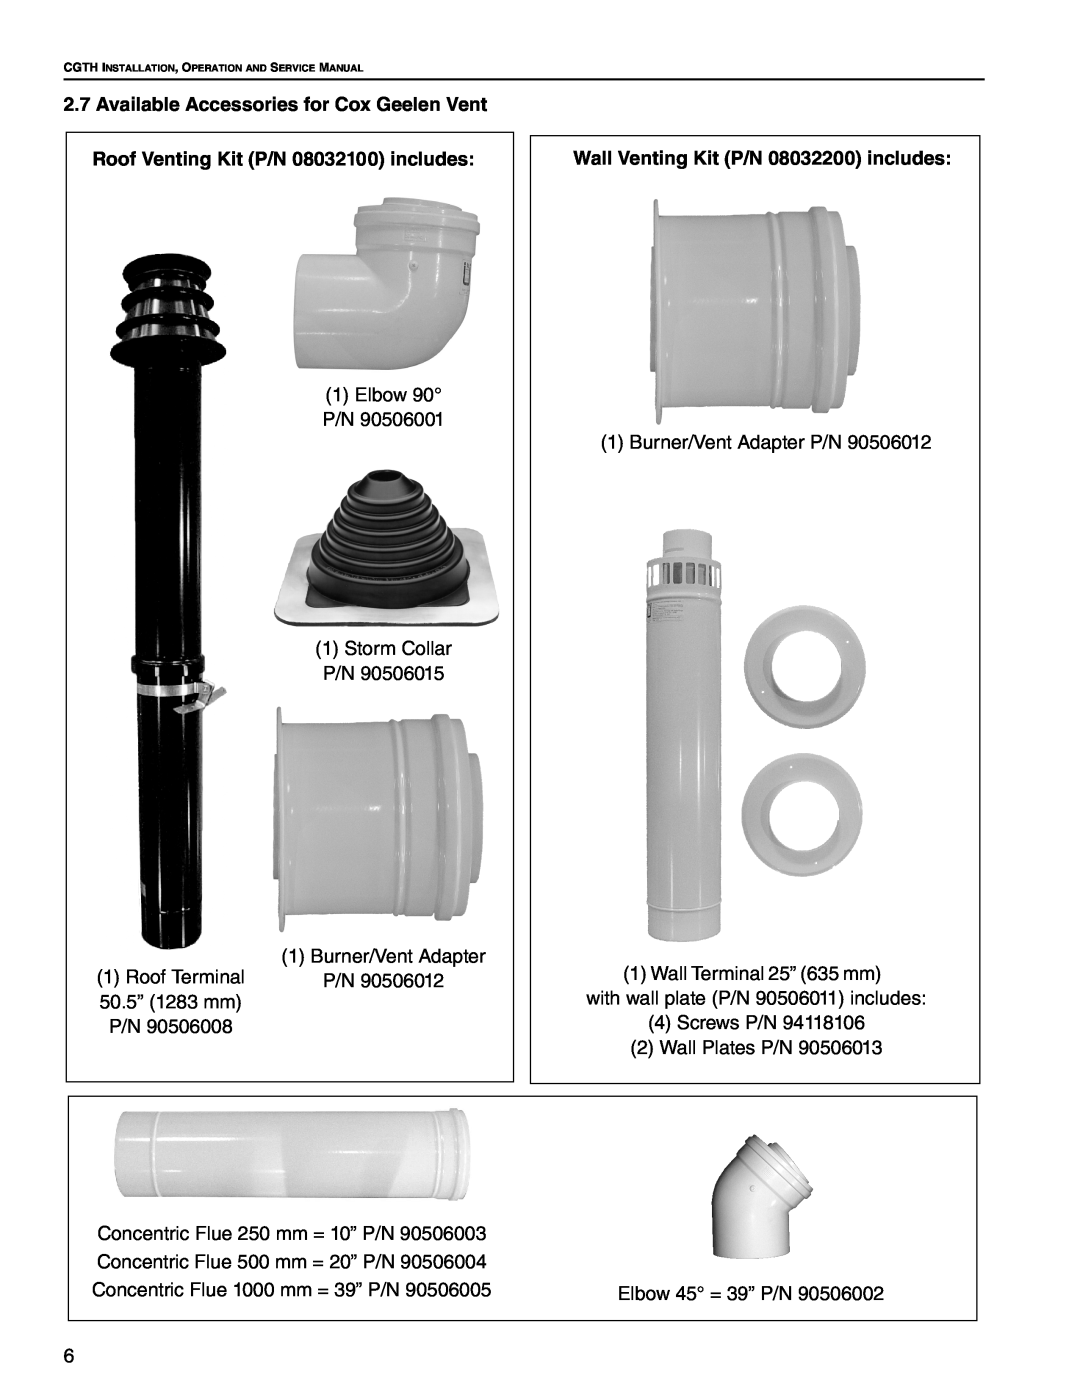 Roberts Gorden CGTH-30, CGTH-50 2.7Available Accessories for Cox Geelen Vent, Roof Venting Kit P/N 08032100 includes 